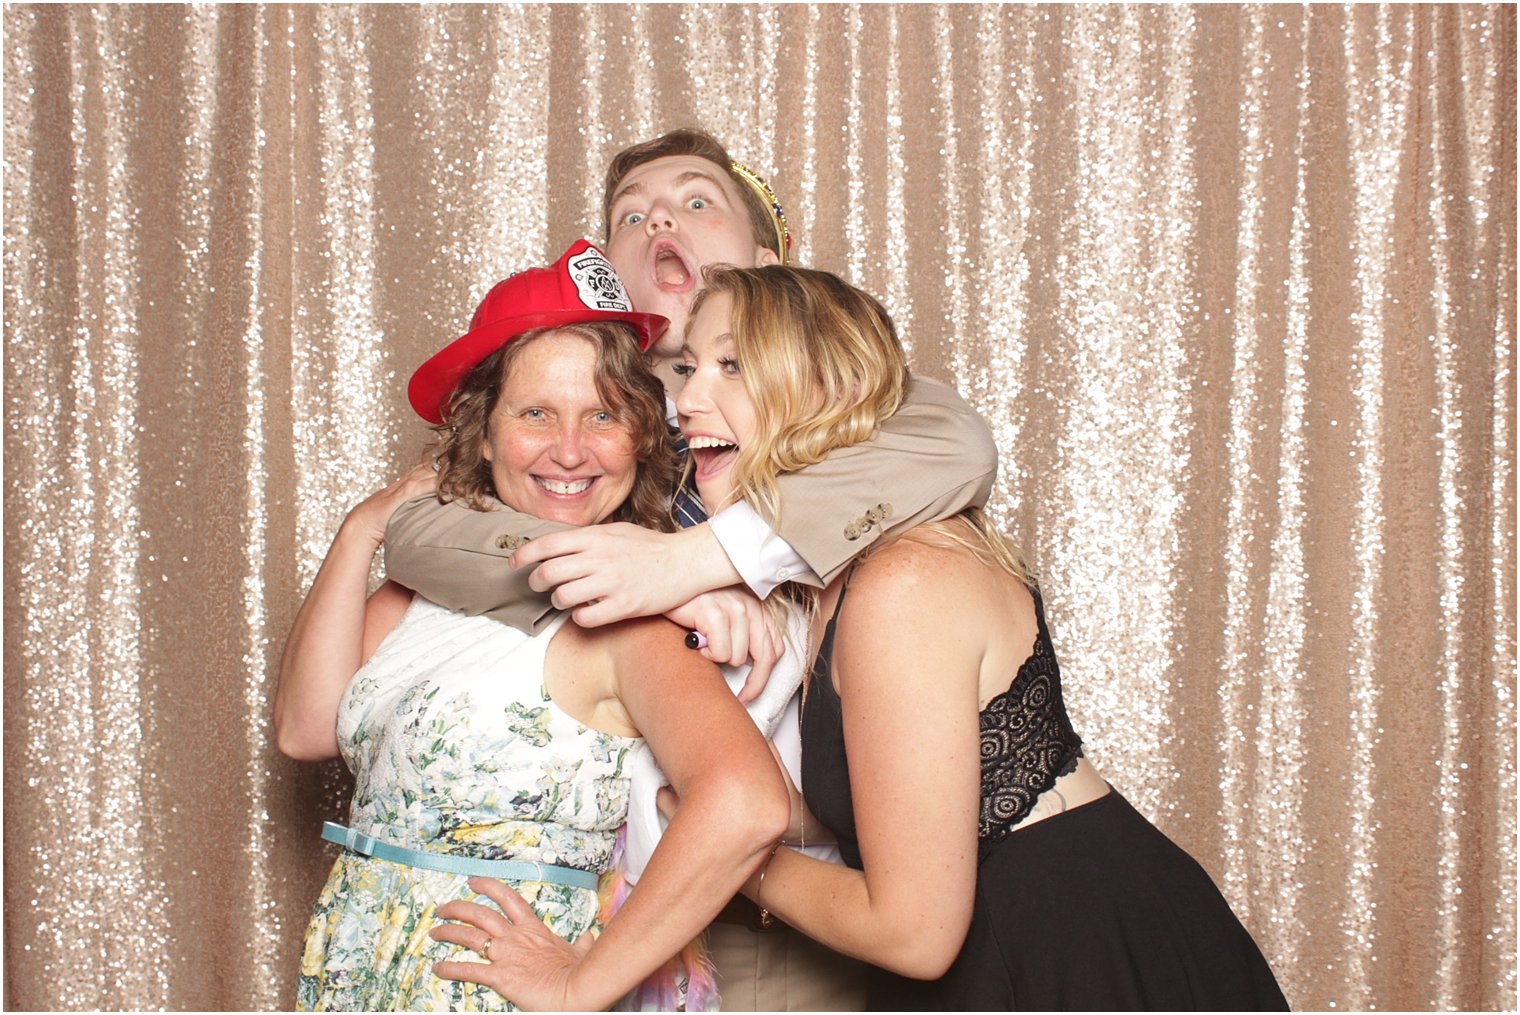 guy hugs mom and sister during photo booth fun against rose gold backdrop